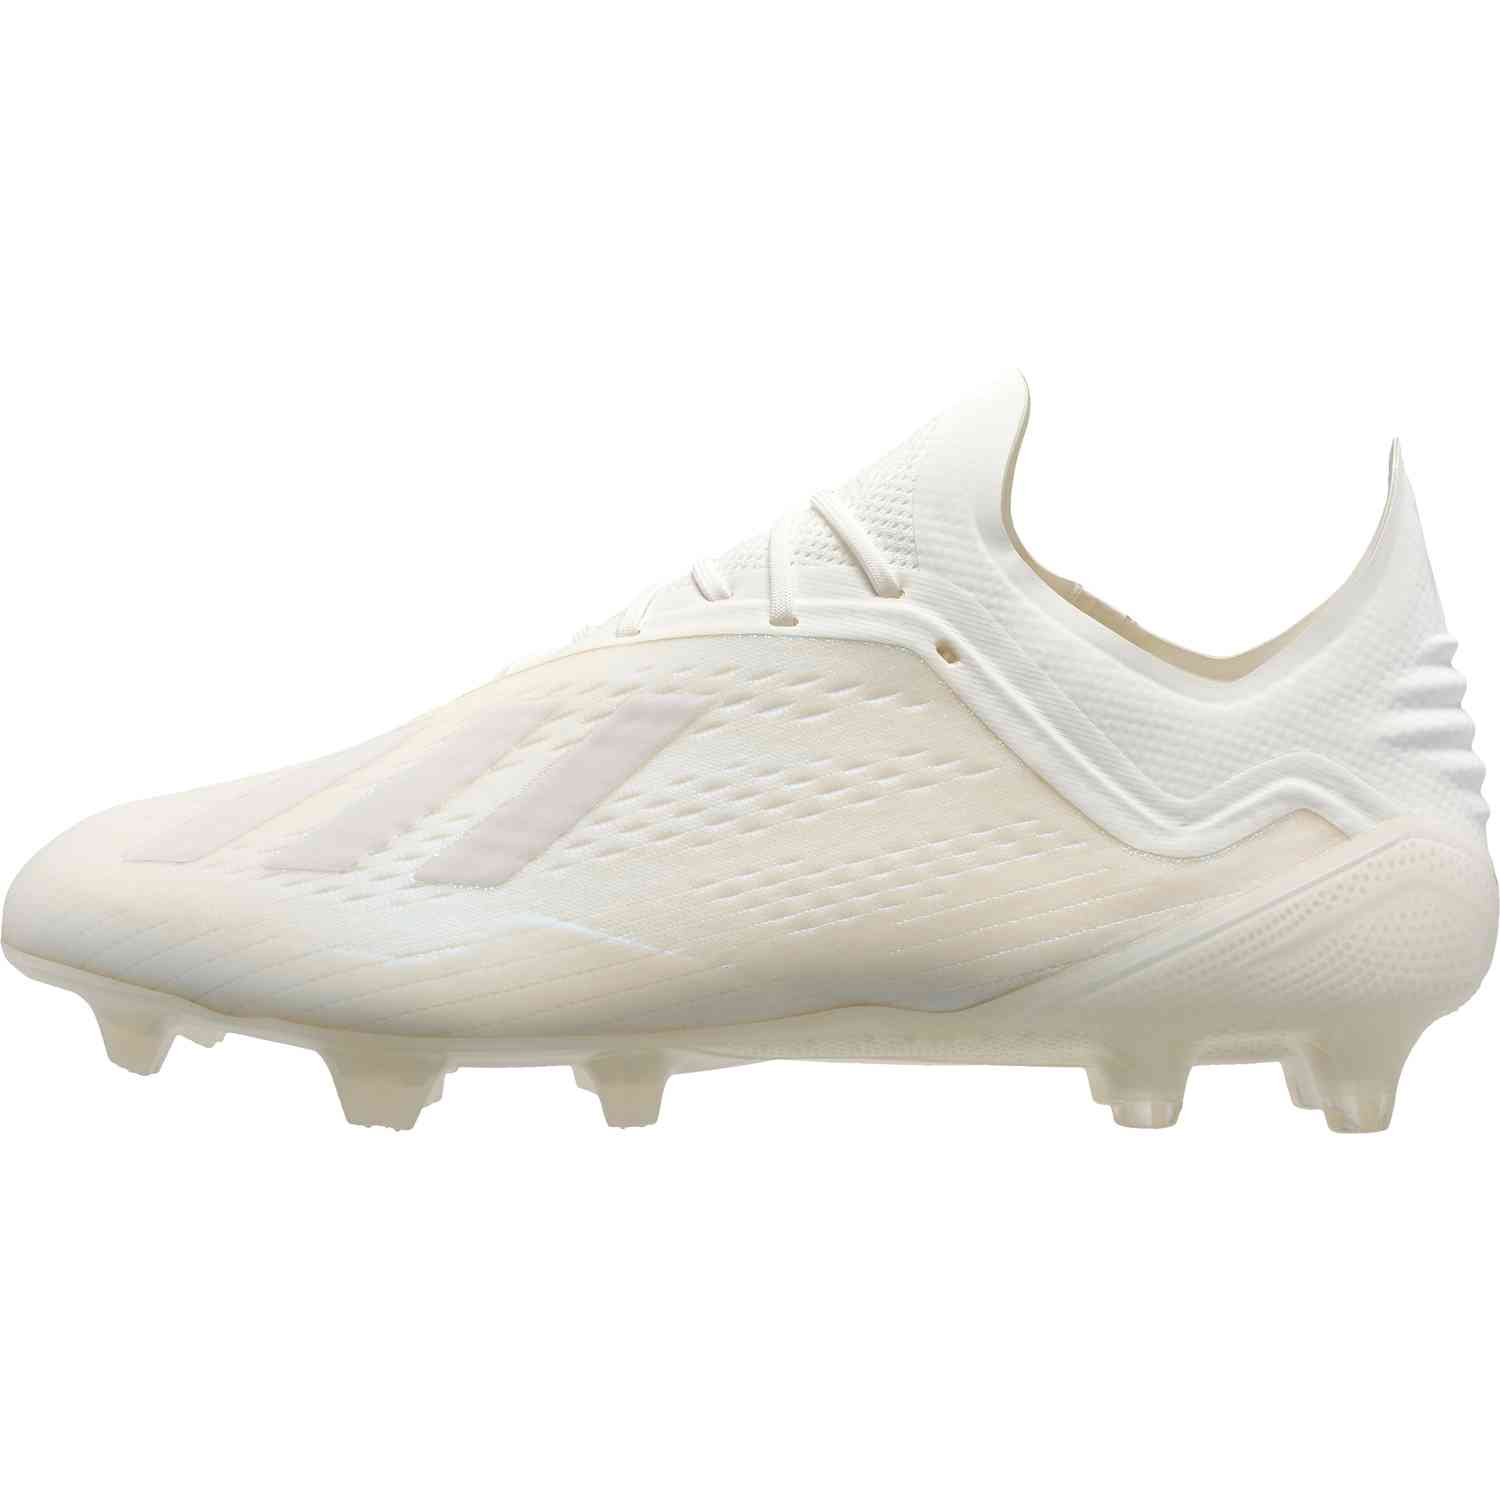 adidas x 18.1 spectral mode